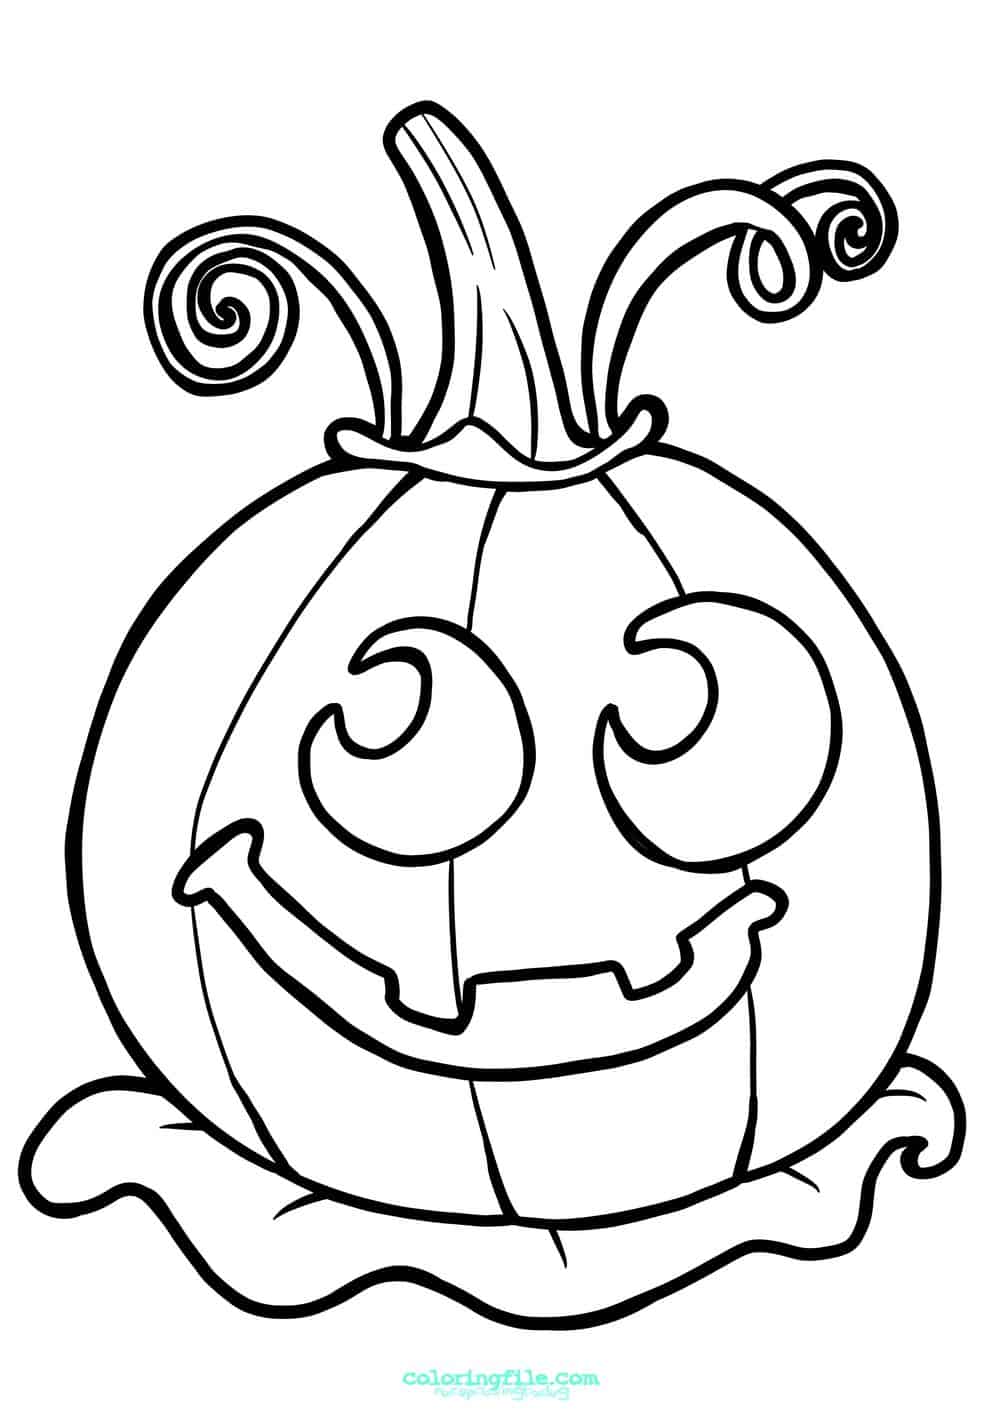 Halloween funny pumpkin coloring pages